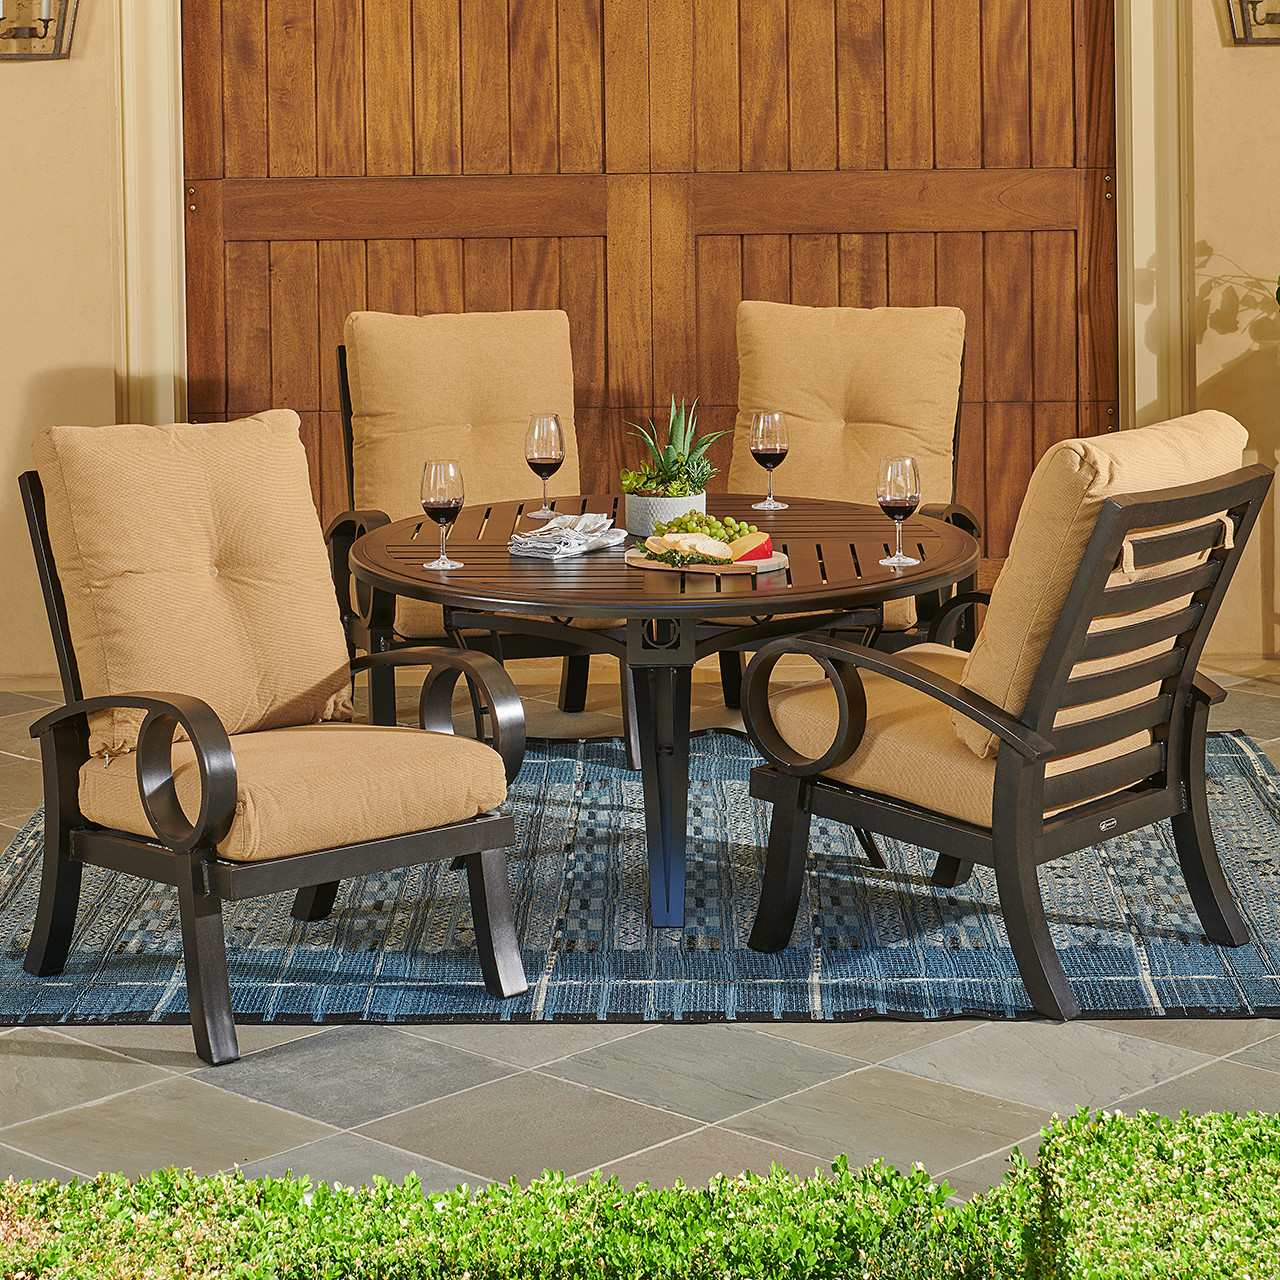 Eclipse Autumn Rust Aluminum with Cushions 5 Piece Dining Set + 54 in. D Table